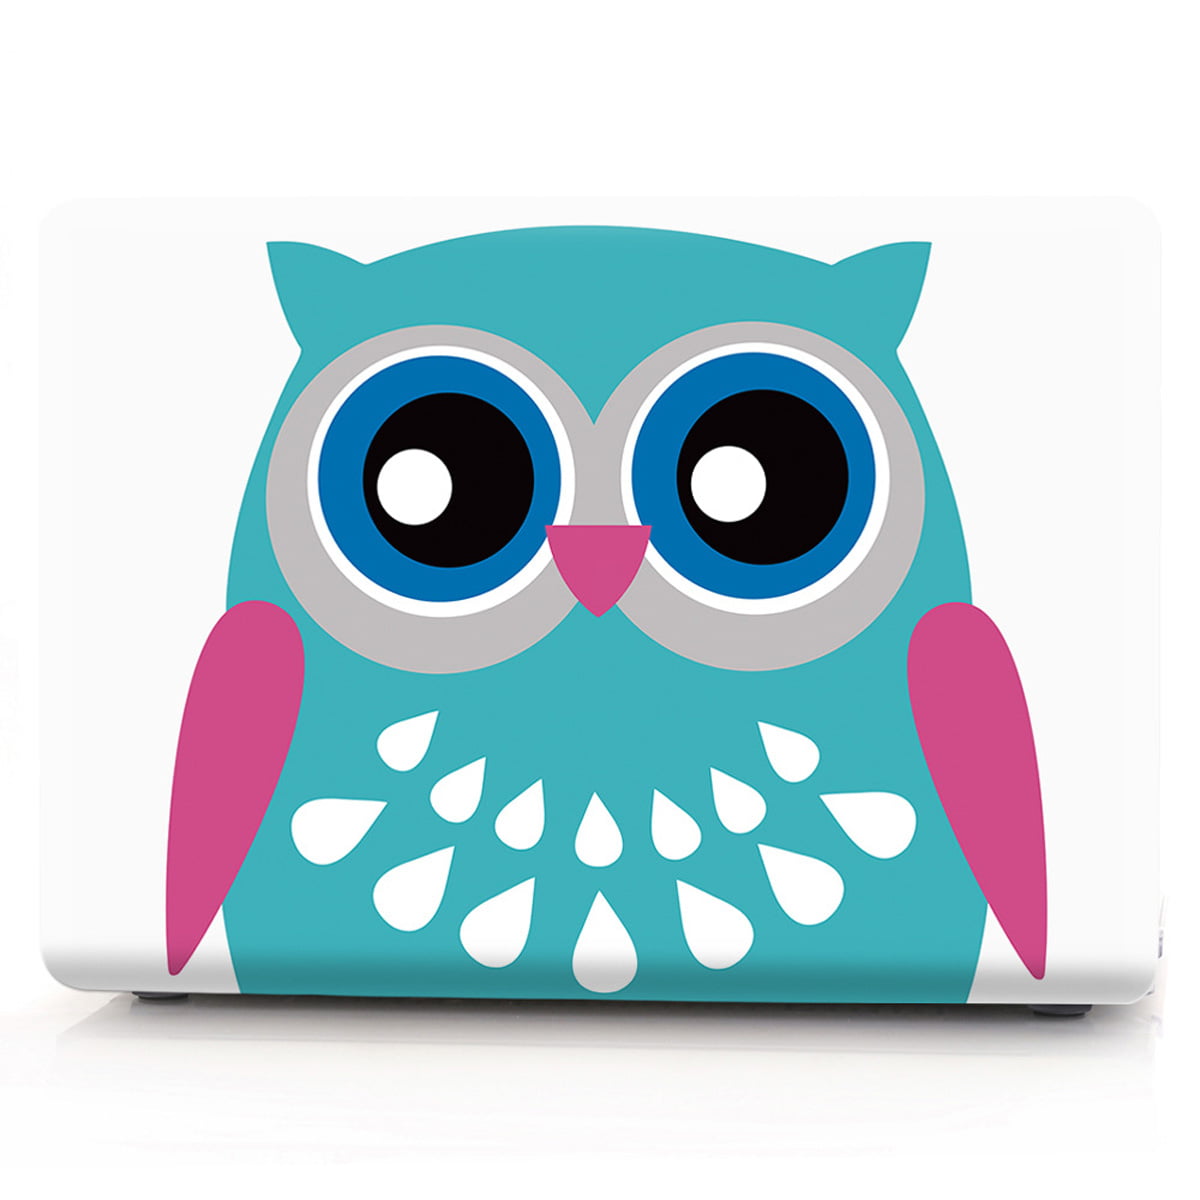 Waterproof Laptop Sleeve Pocket MacBook Air Pro Case Many Funny Owls On The Tree Cover for All Computer Notebook 13 Inch